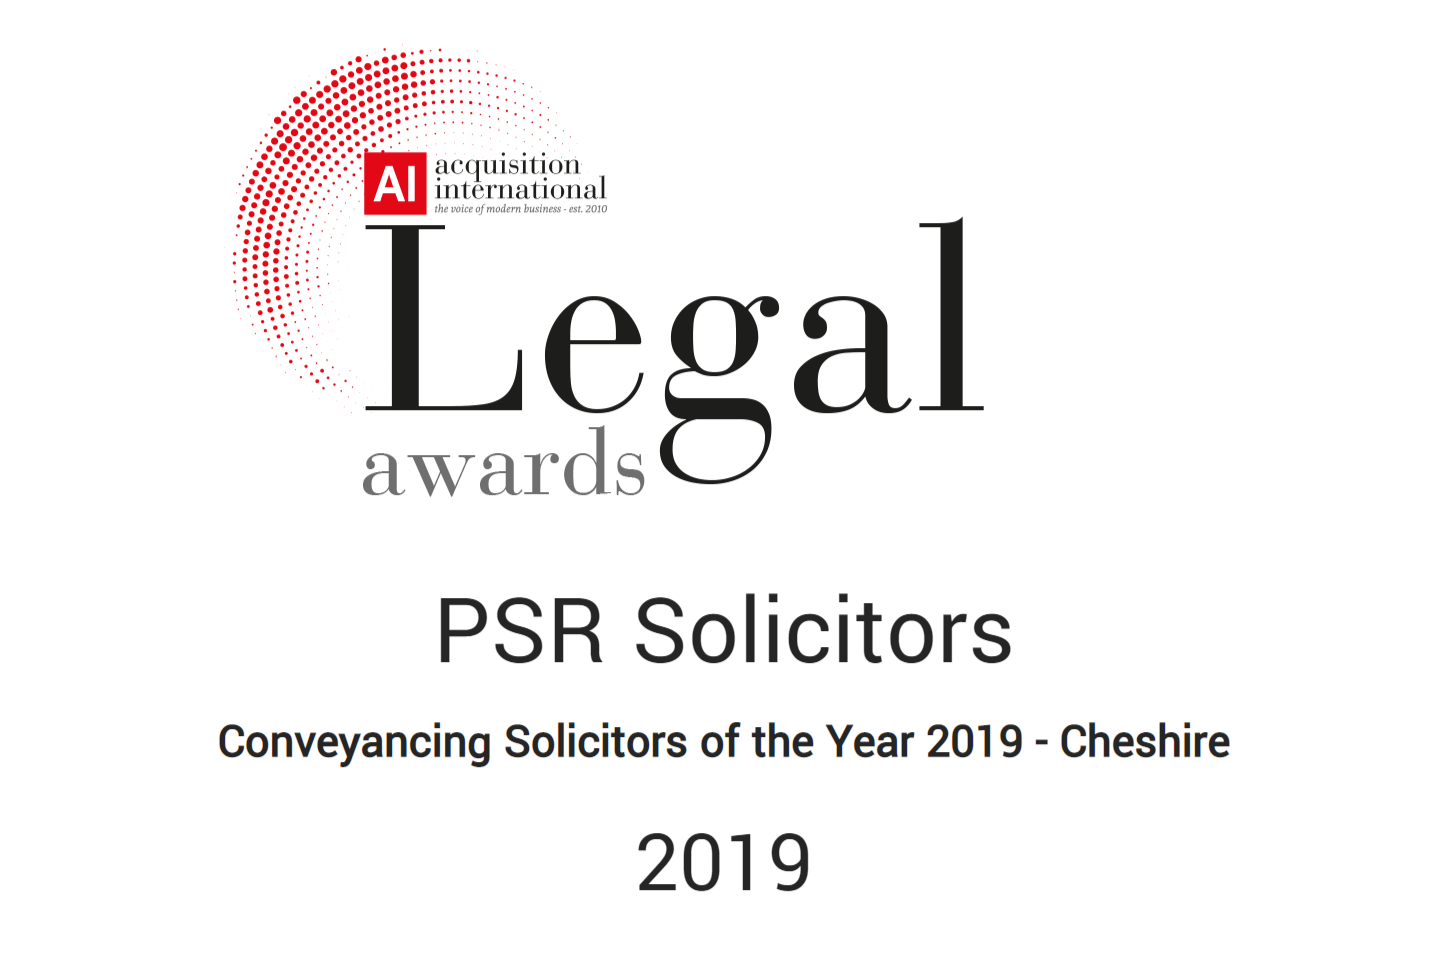 Legal Awards Conveyancing Solicitors of the Year 2019 - Cheshire